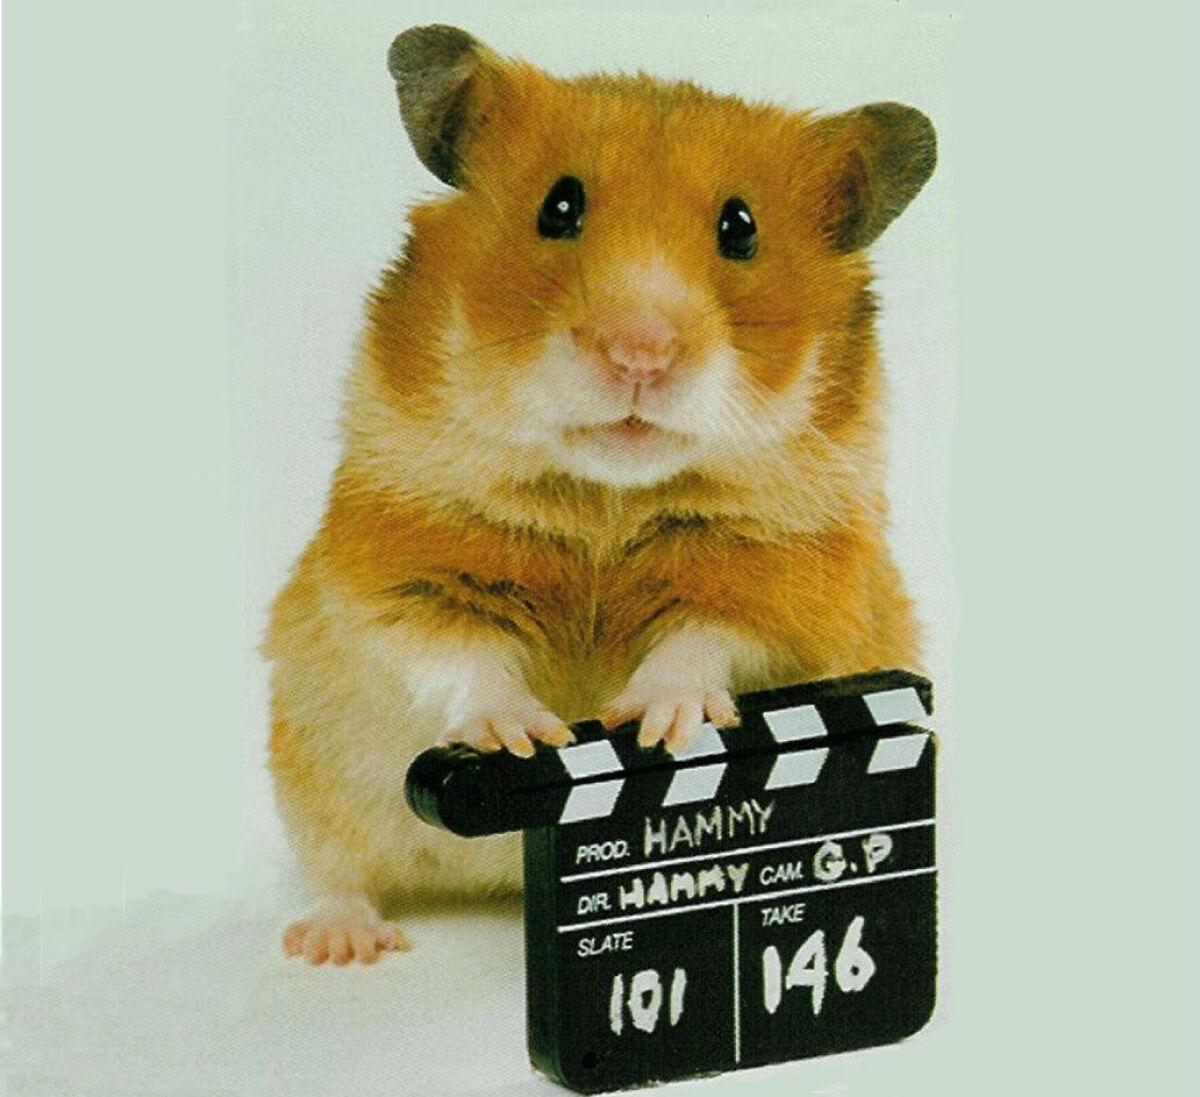 desmond chiam recommends free hamster movies pic